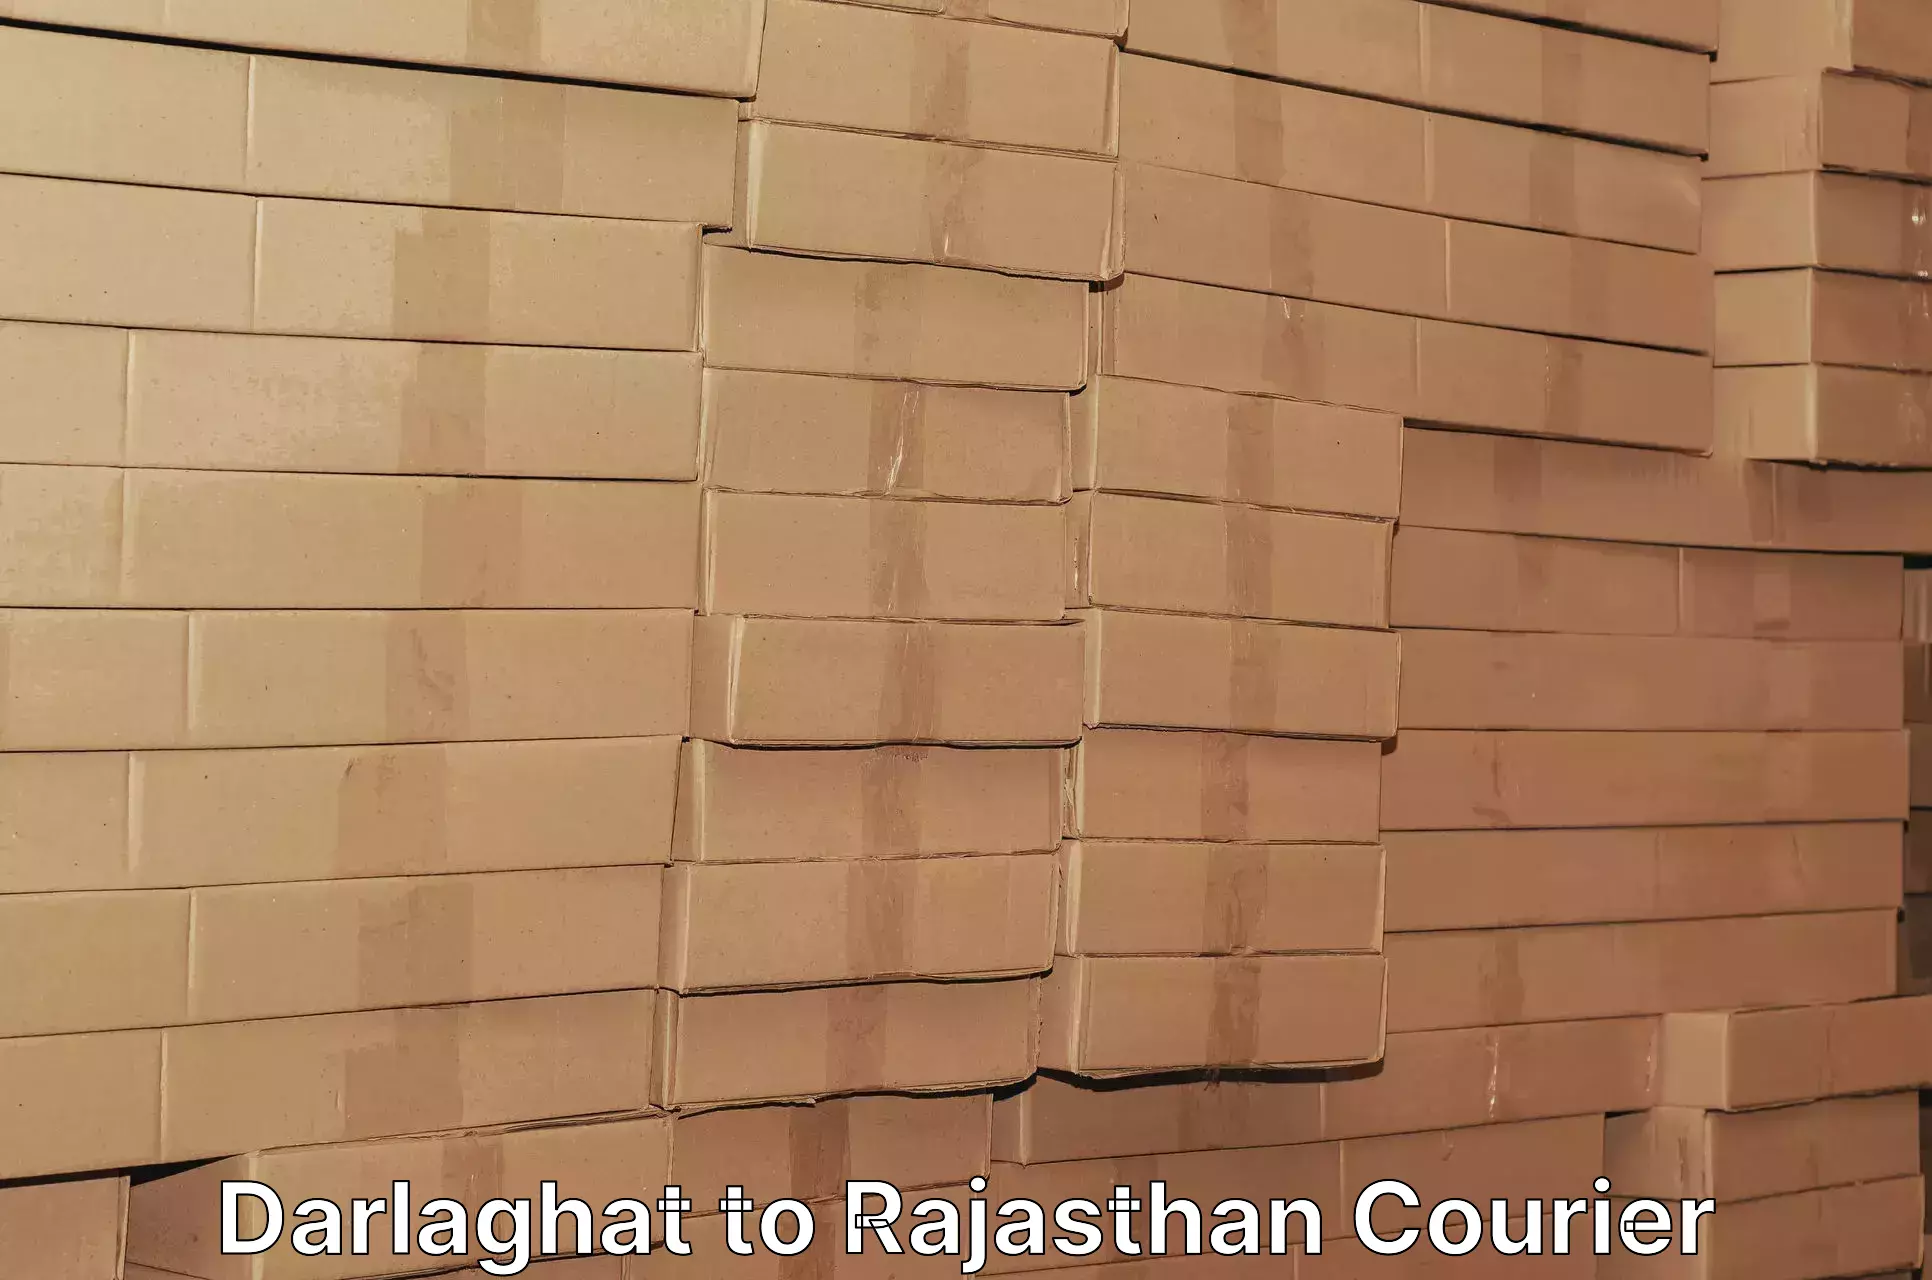 Tech-enabled shipping Darlaghat to Rajasthan